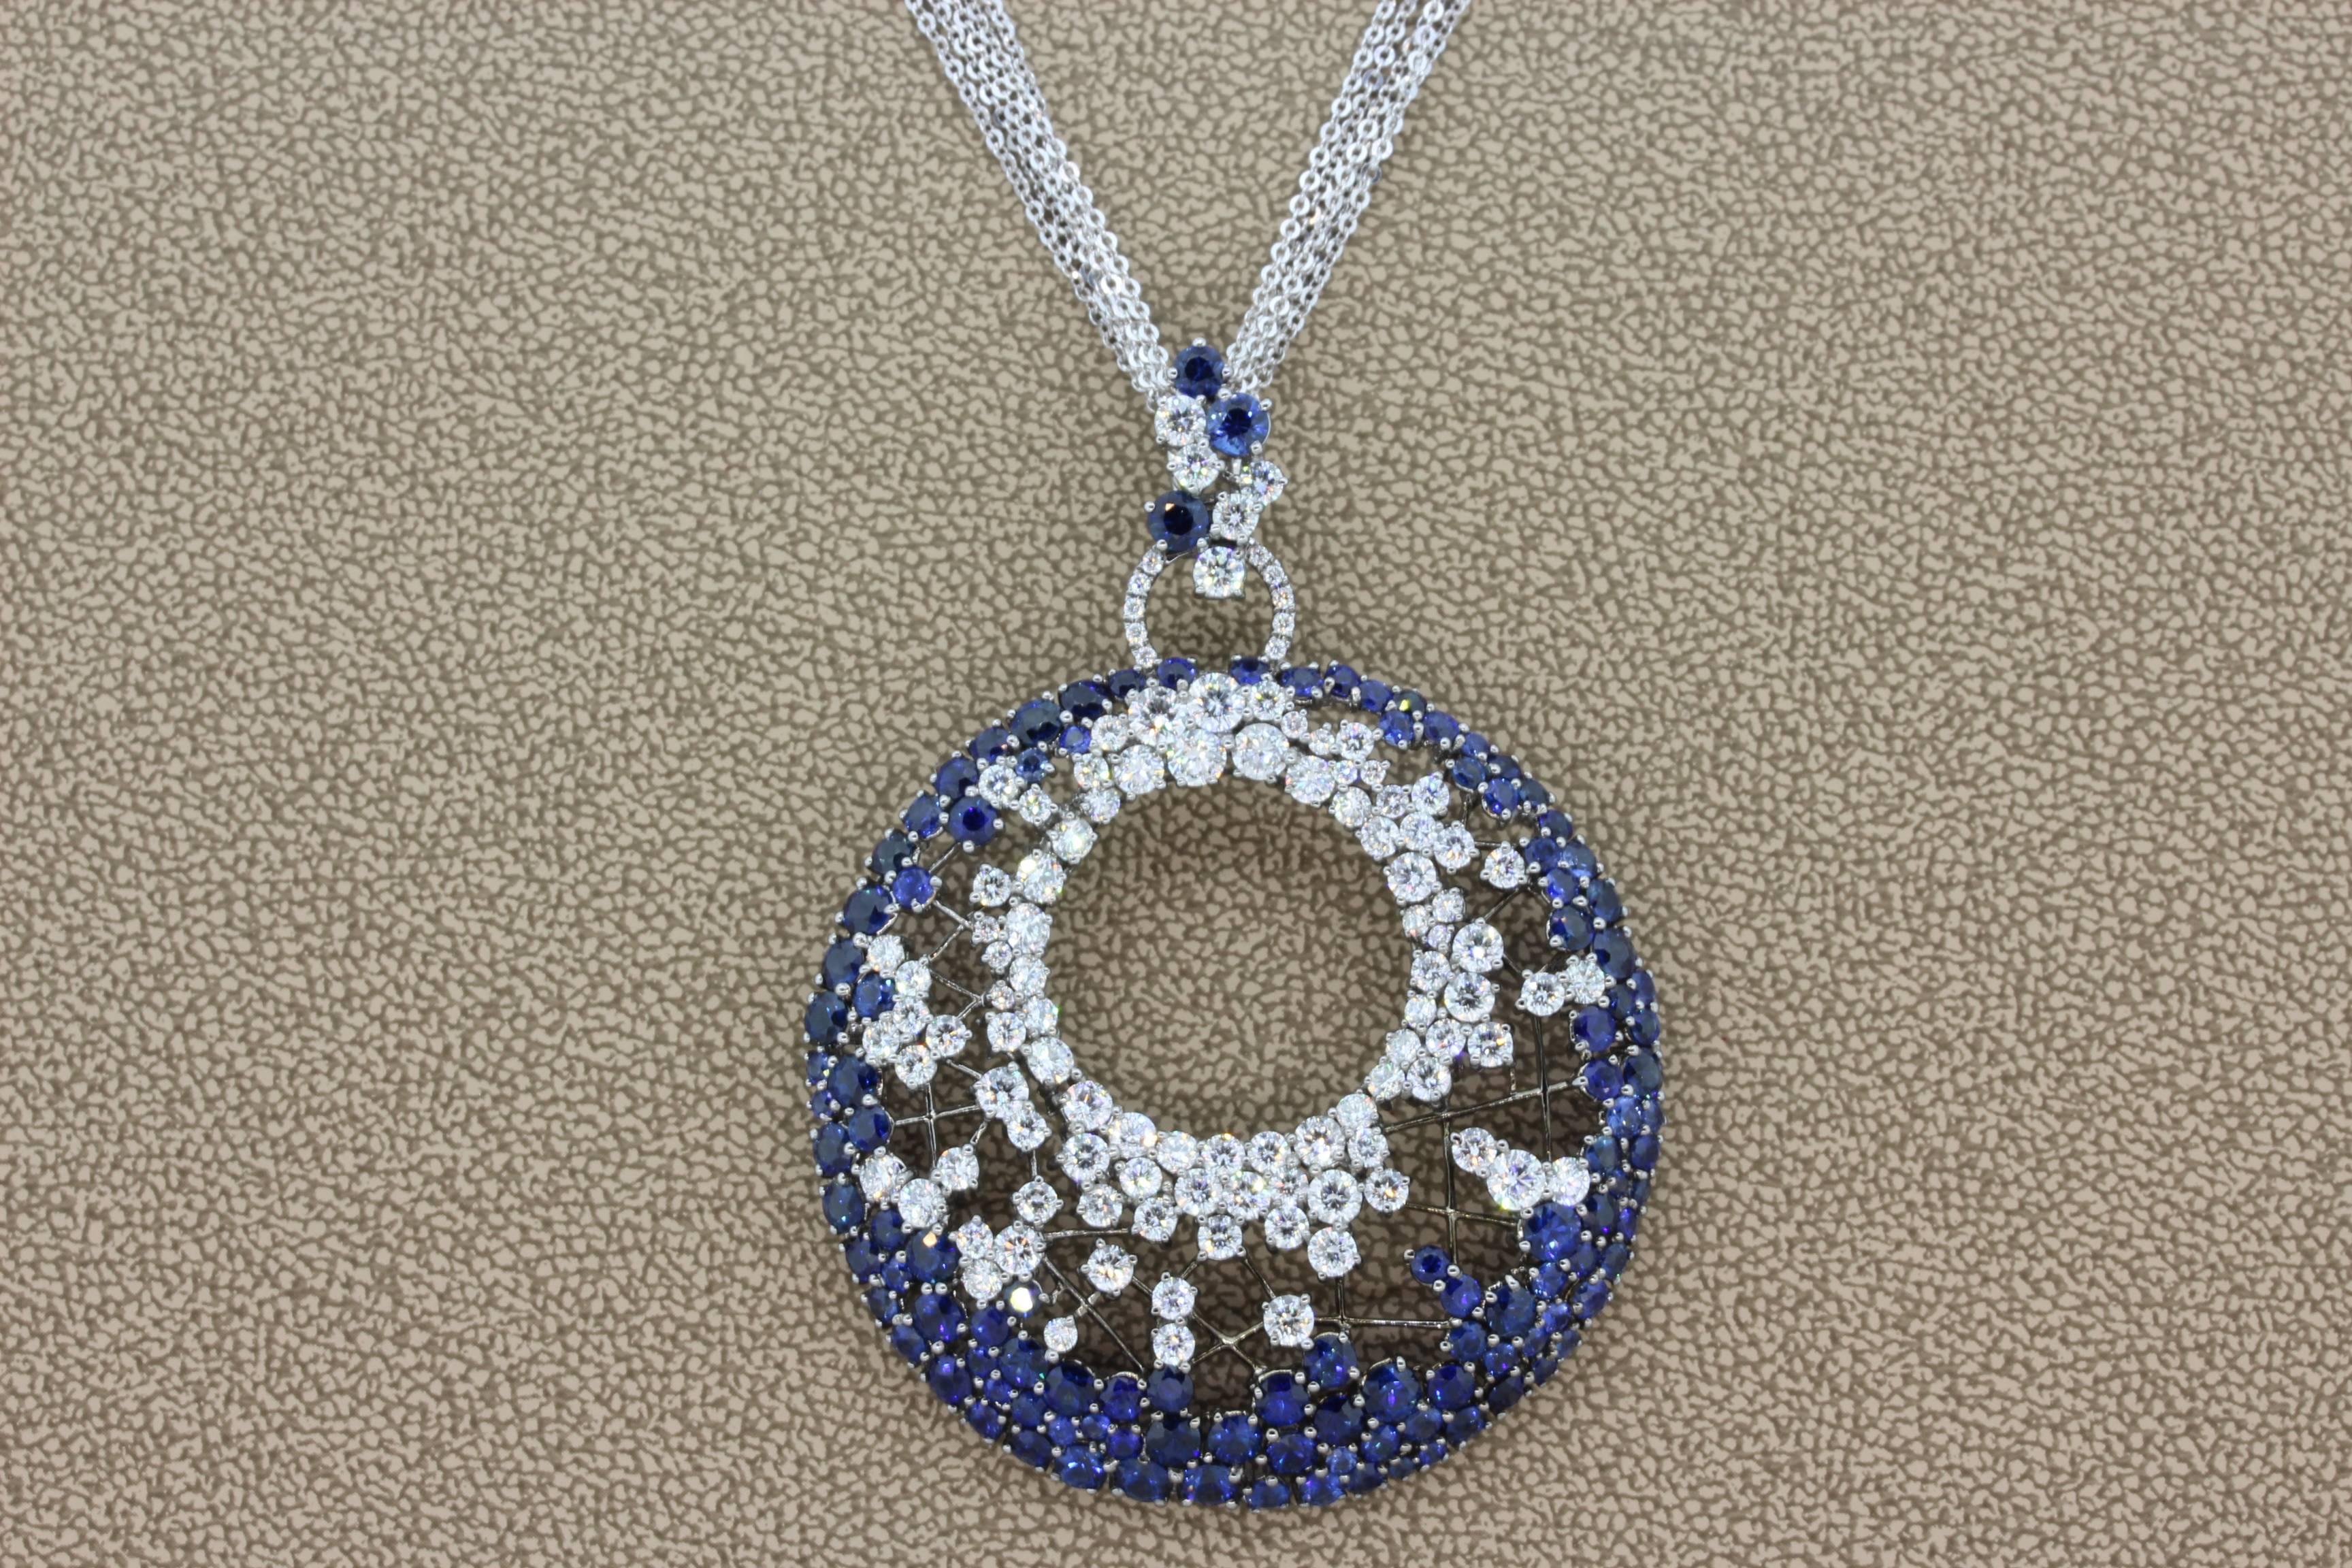 A sexy and sleek design, this pendant features 5.86 carats of VS quality round cut diamonds and 8.54 carats of vivid blue sapphires. The gems seem to be caught in a web of 18K gold. The pendant comes with a multi strand gold necklace, 17